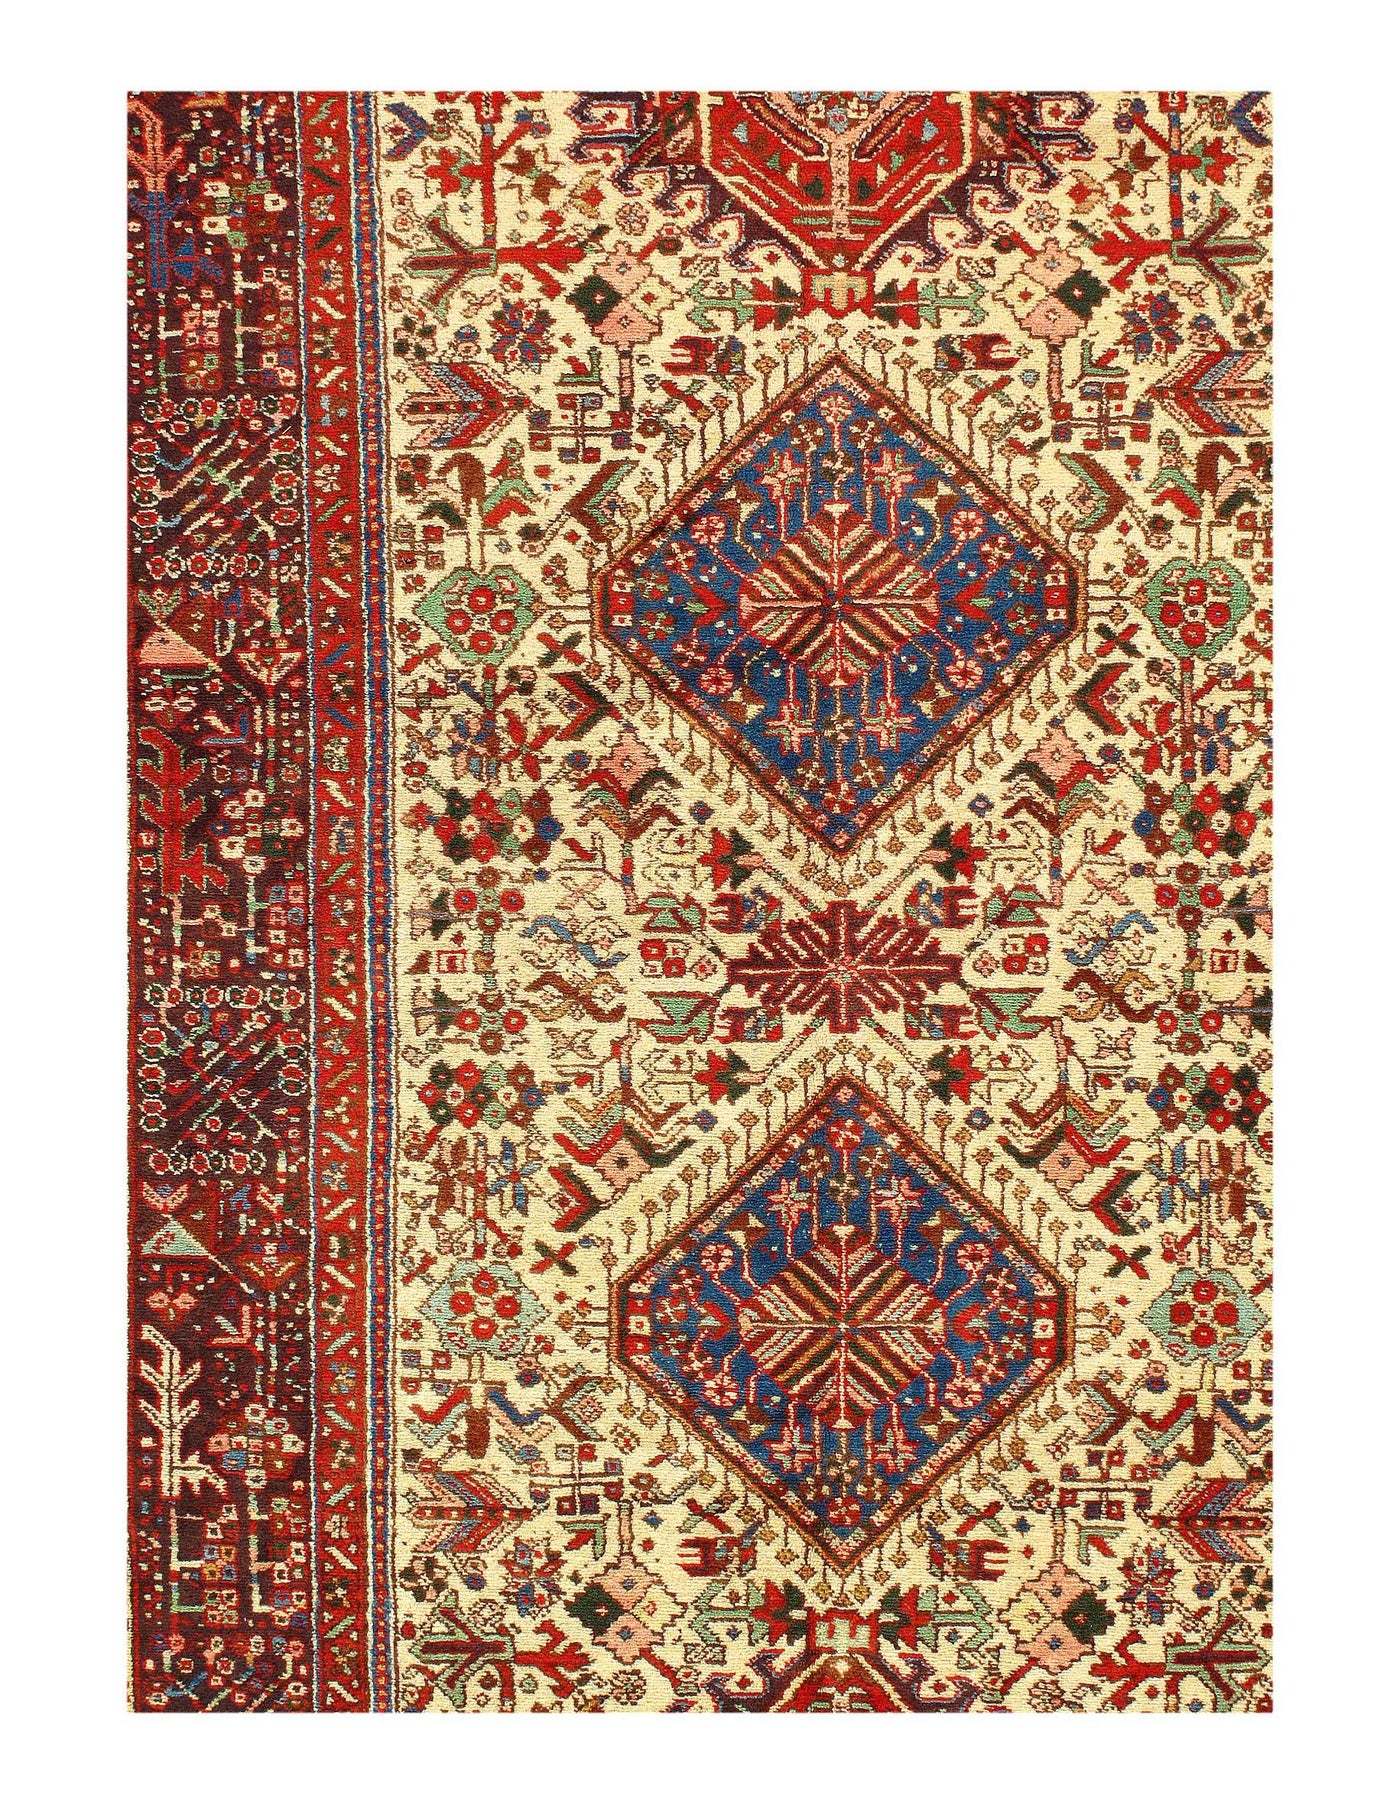 Canvello Hand-Knotted Antique Persian Runner Rug - 5' X 12'